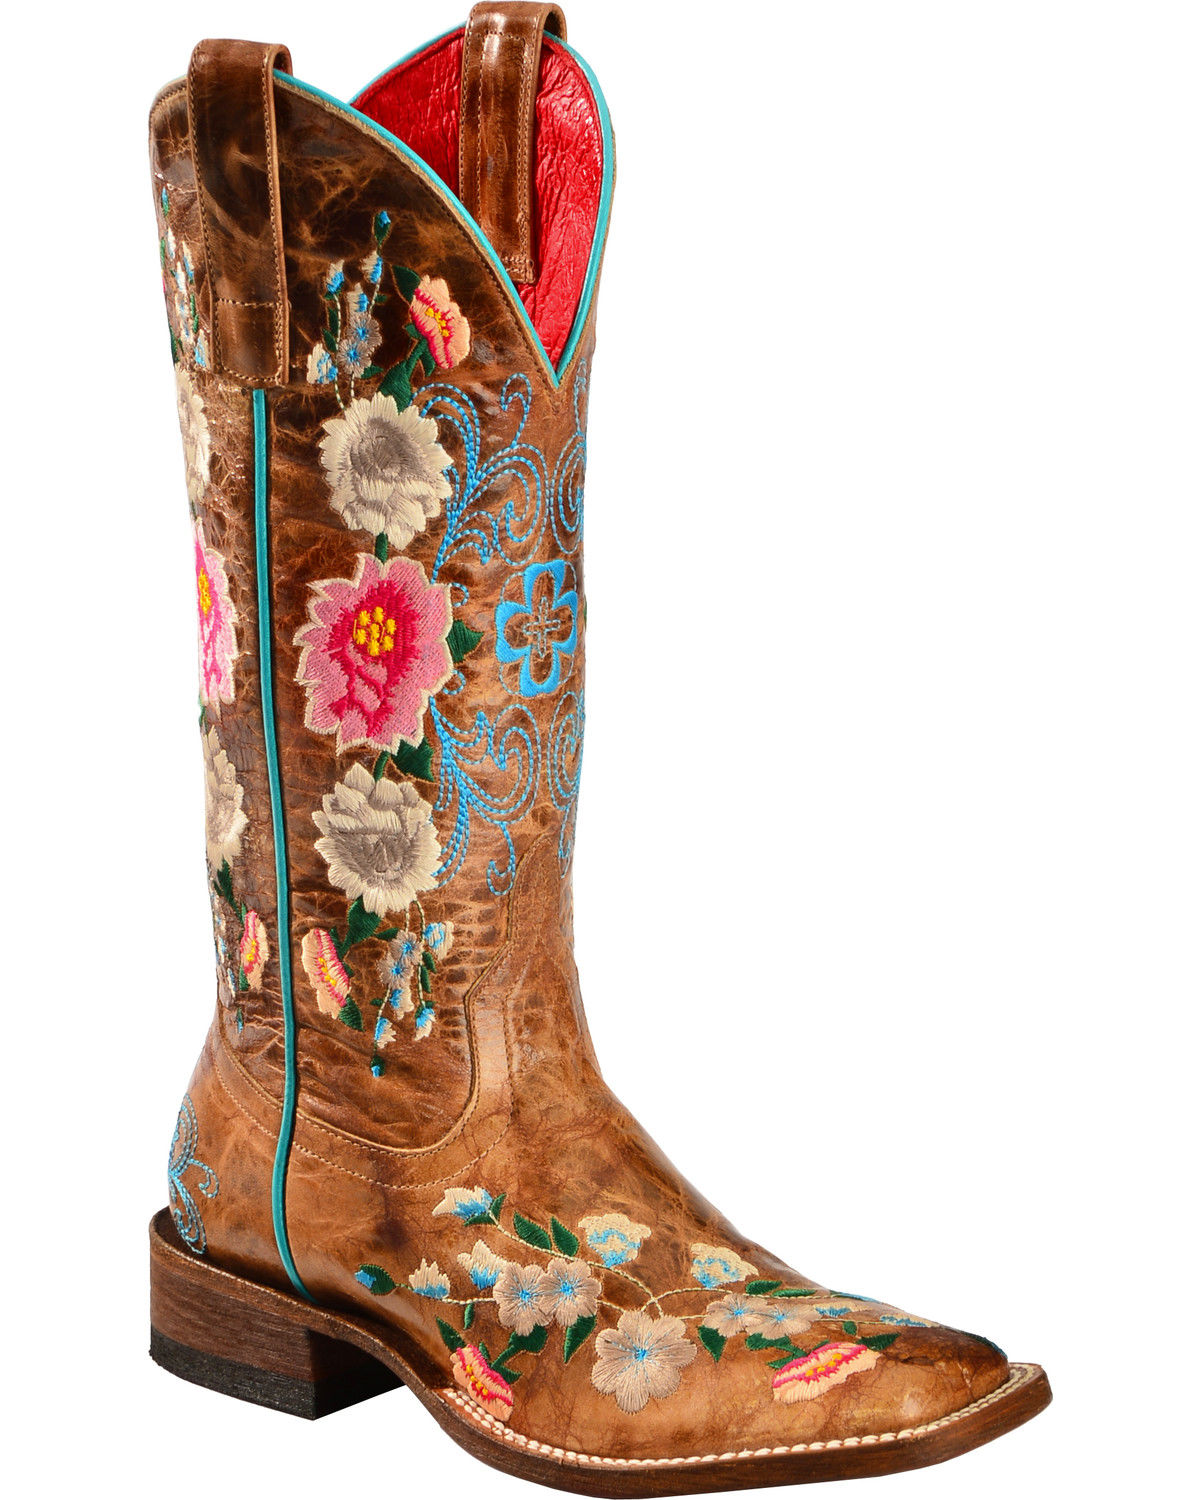 Cowboy boots for women outfit ideas